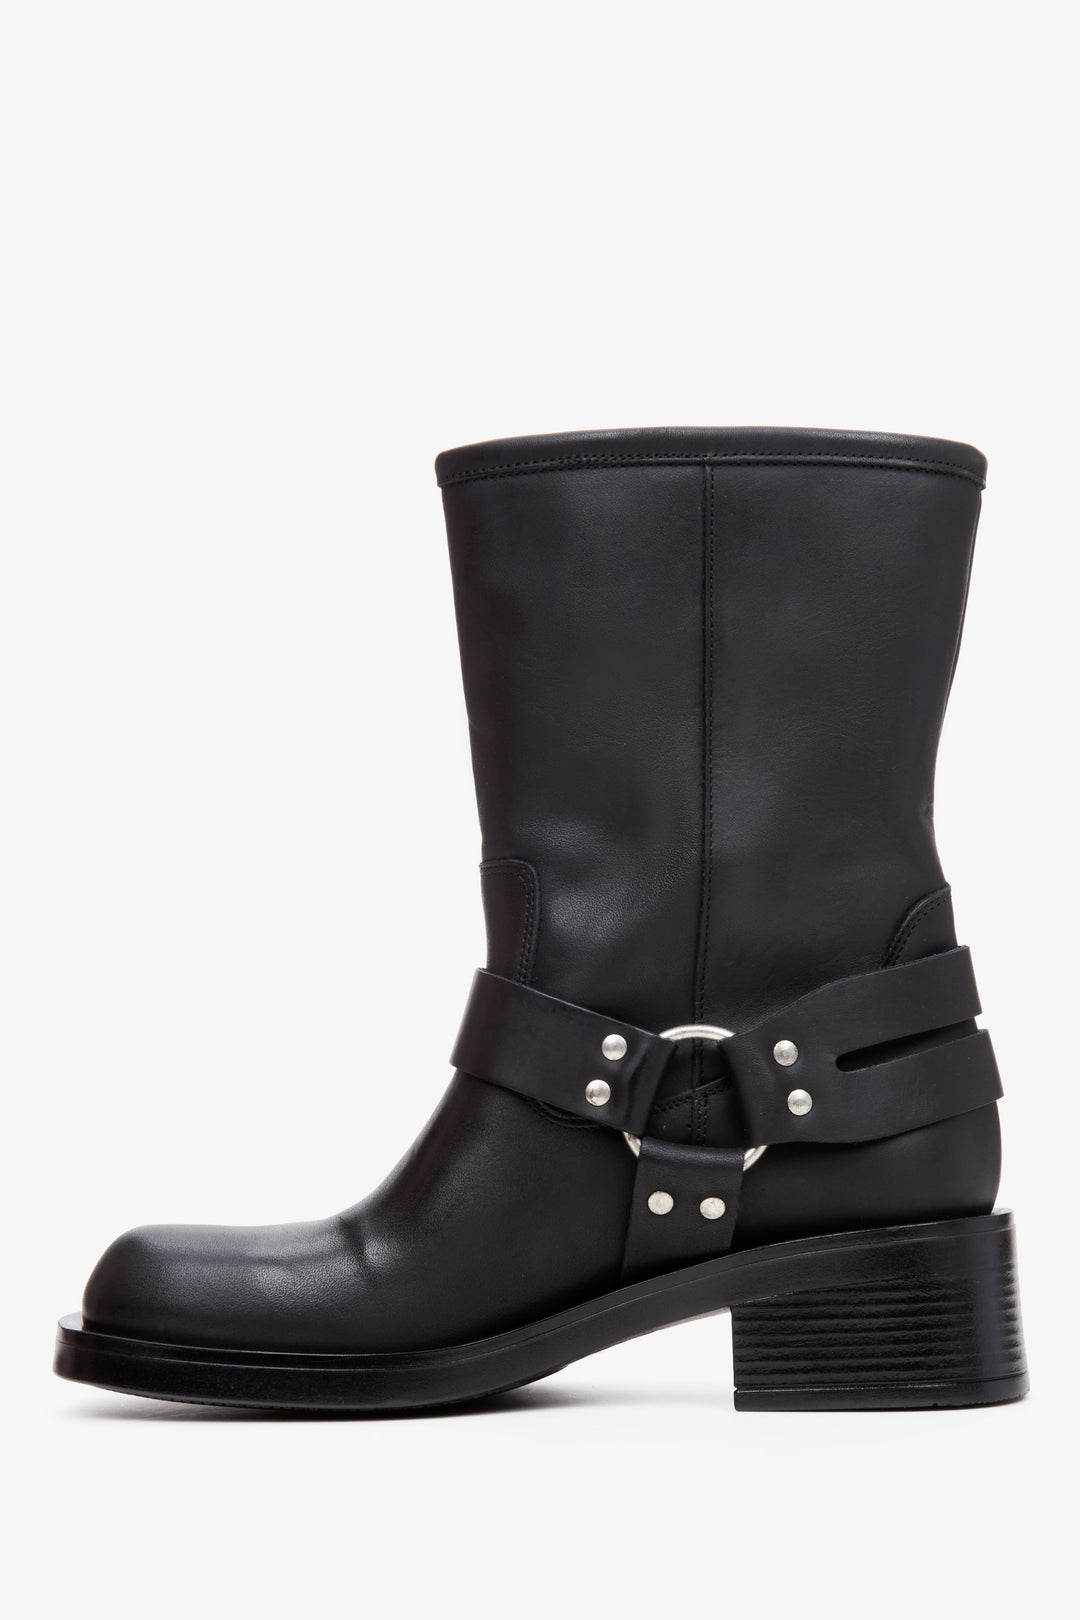 Women's black leather boots with jet embellishments by Estro - shoe profile.